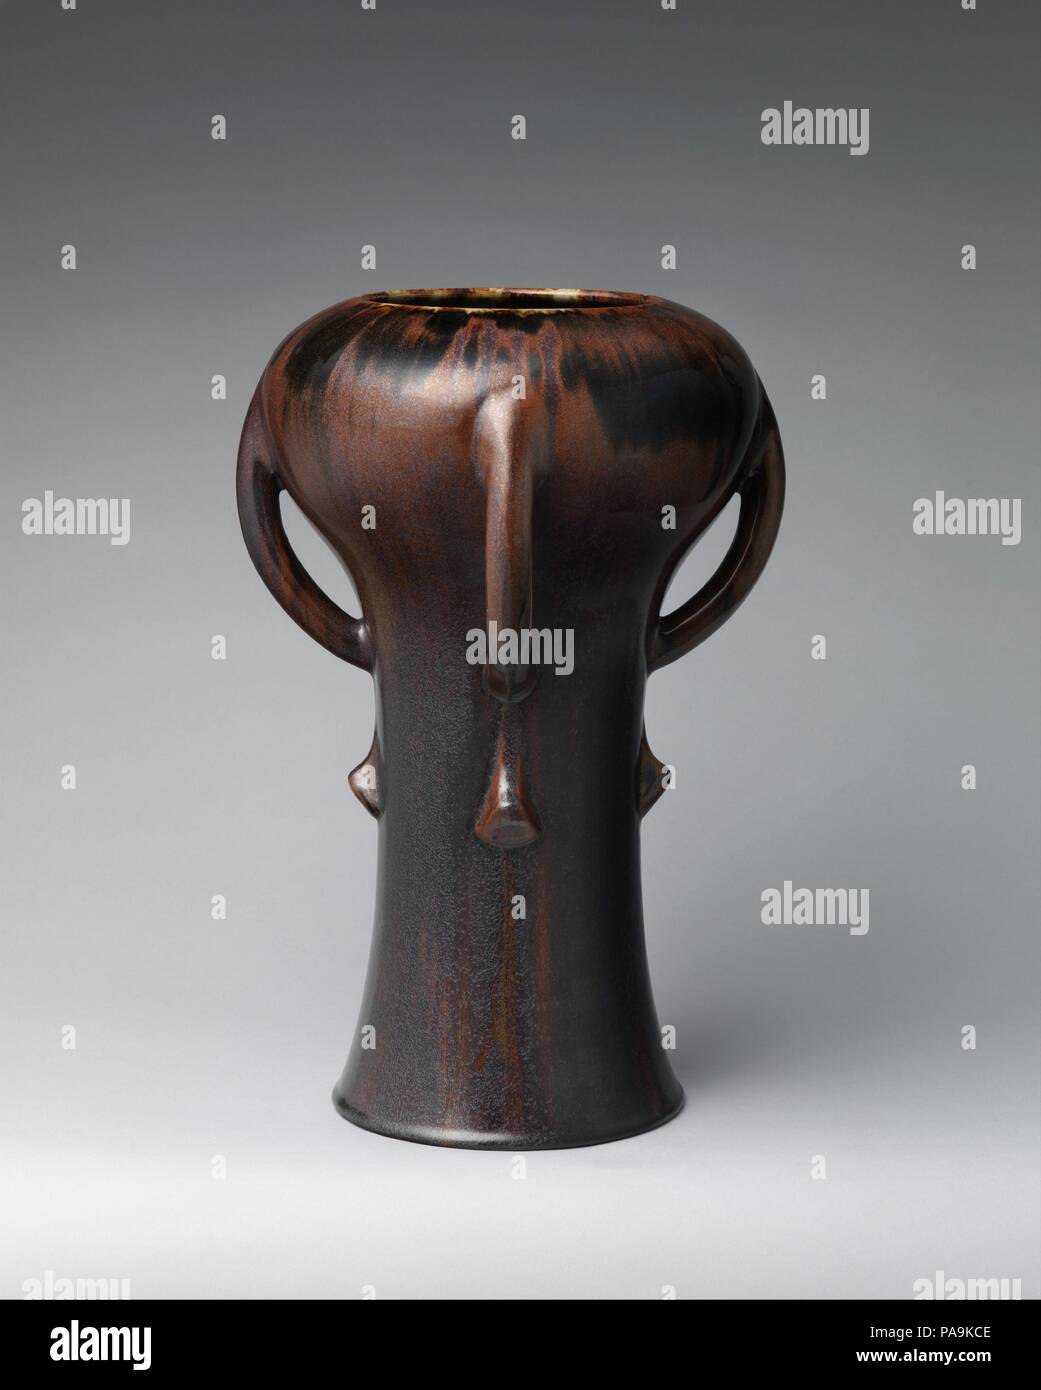 Vase. Culture: French, Paris. Dimensions: Overall (confirmed): 15 15/16 × 10 5/8 × 10 5/8 in., 12.2 lb. (40.5 × 27 × 27 cm, 5.6 kg). Maker: Auguste Delaherche (French, Beauvais 1857-1940 Paris). Date: ca. 1893.  Determined that pottery vessels should be regarded as true works of art, avant-garde ceramicists in France in the last decades of the nineteenth century transformed their craft into an intellectual and emotional endeavor. The pioneers of this revival were Jean Carriès, Ernest Chaplet, Théodore Deck, and Auguste Delaherche. These revolutionary artist-potters embraced artisanal tradition Stock Photo